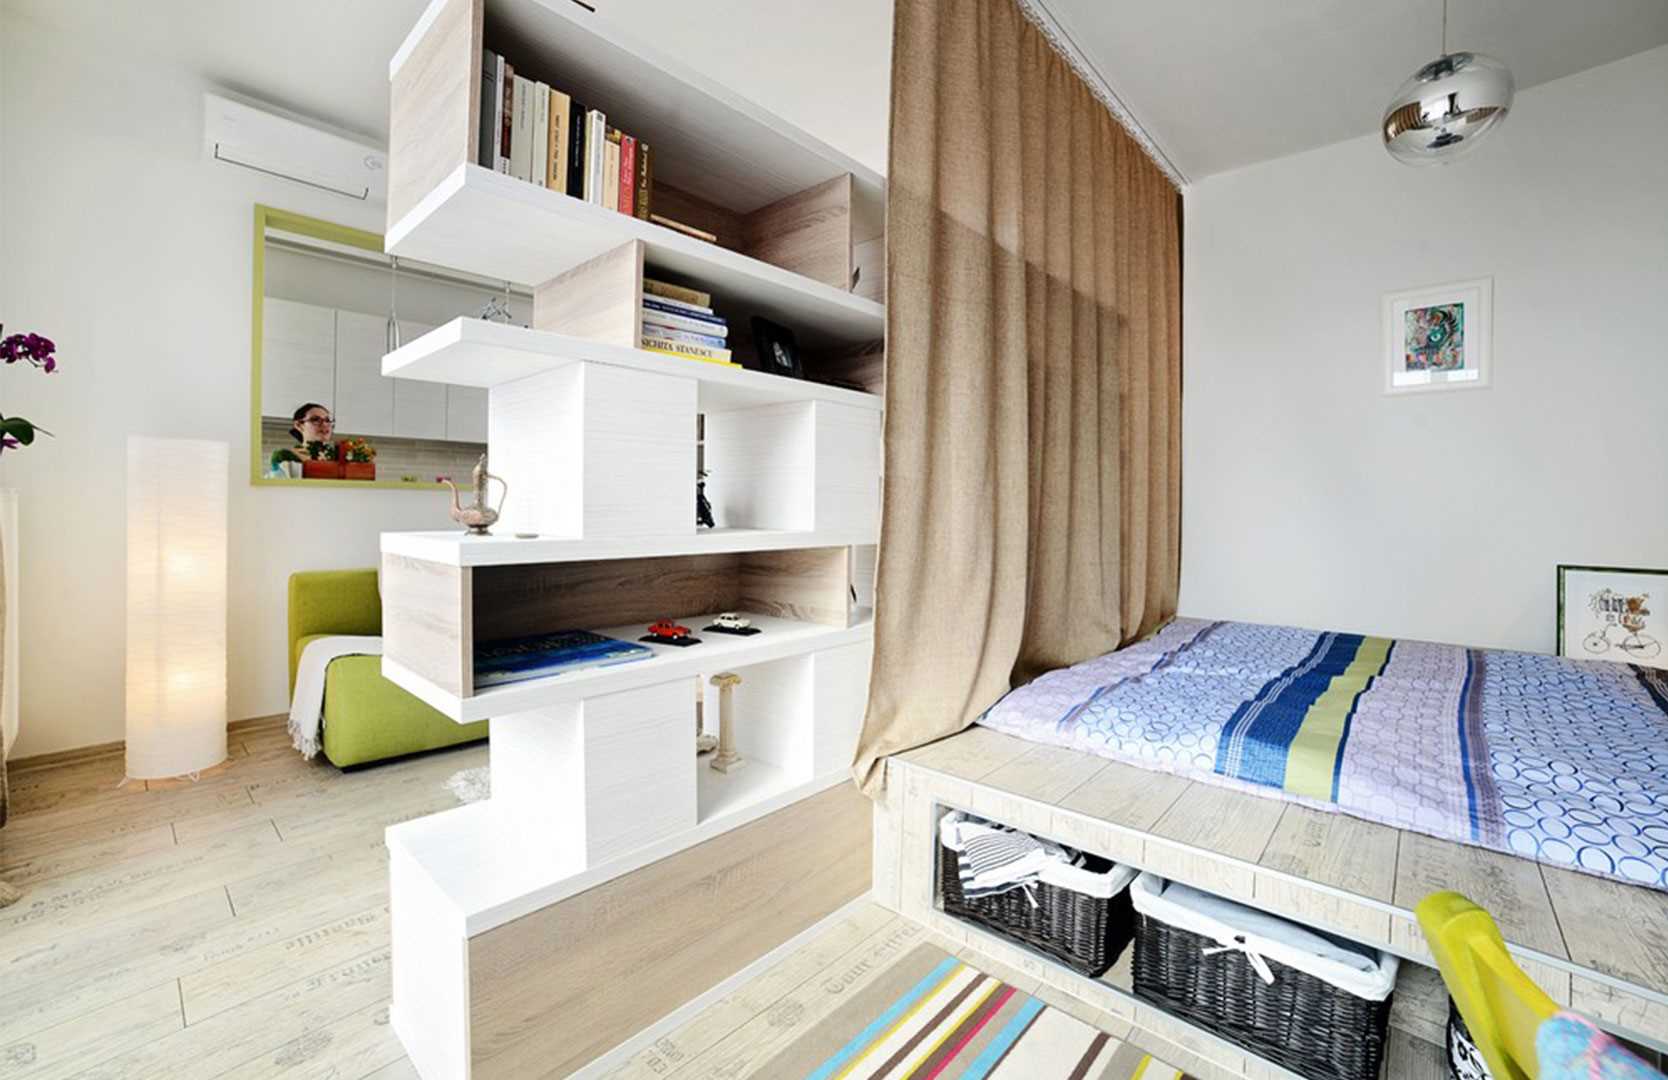 variant of the beautiful interior of a small dorm room